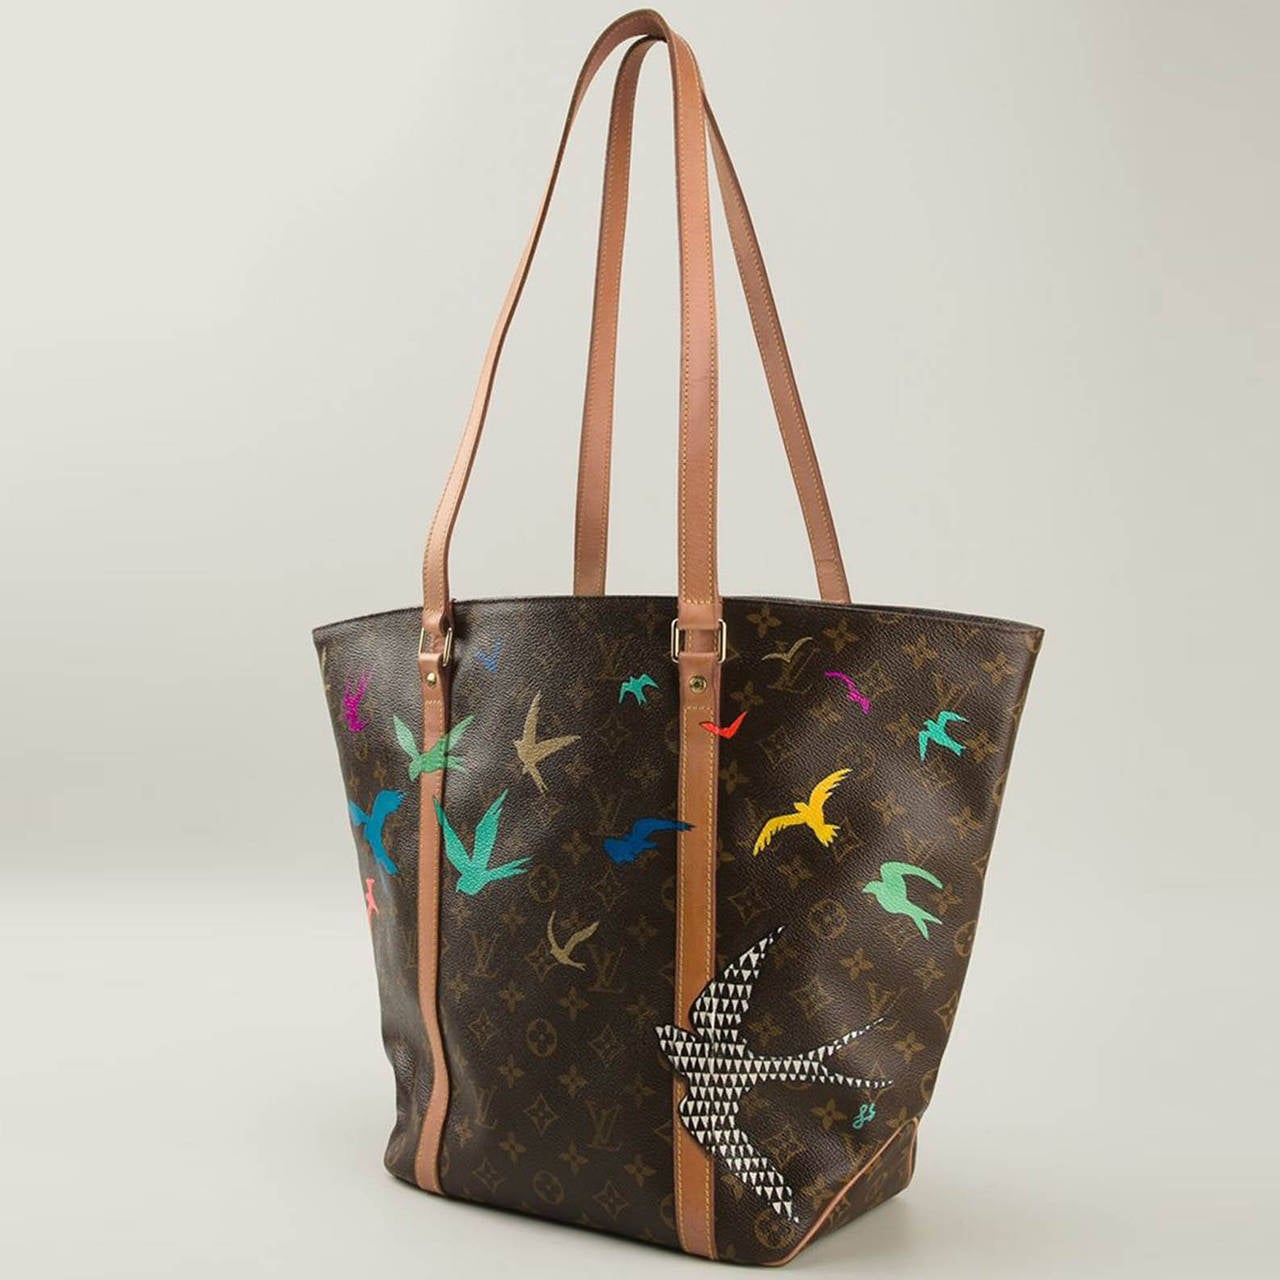 Louis Vuitton Hand Painted Monogram Shopper Bag For Sale at 1stdibs